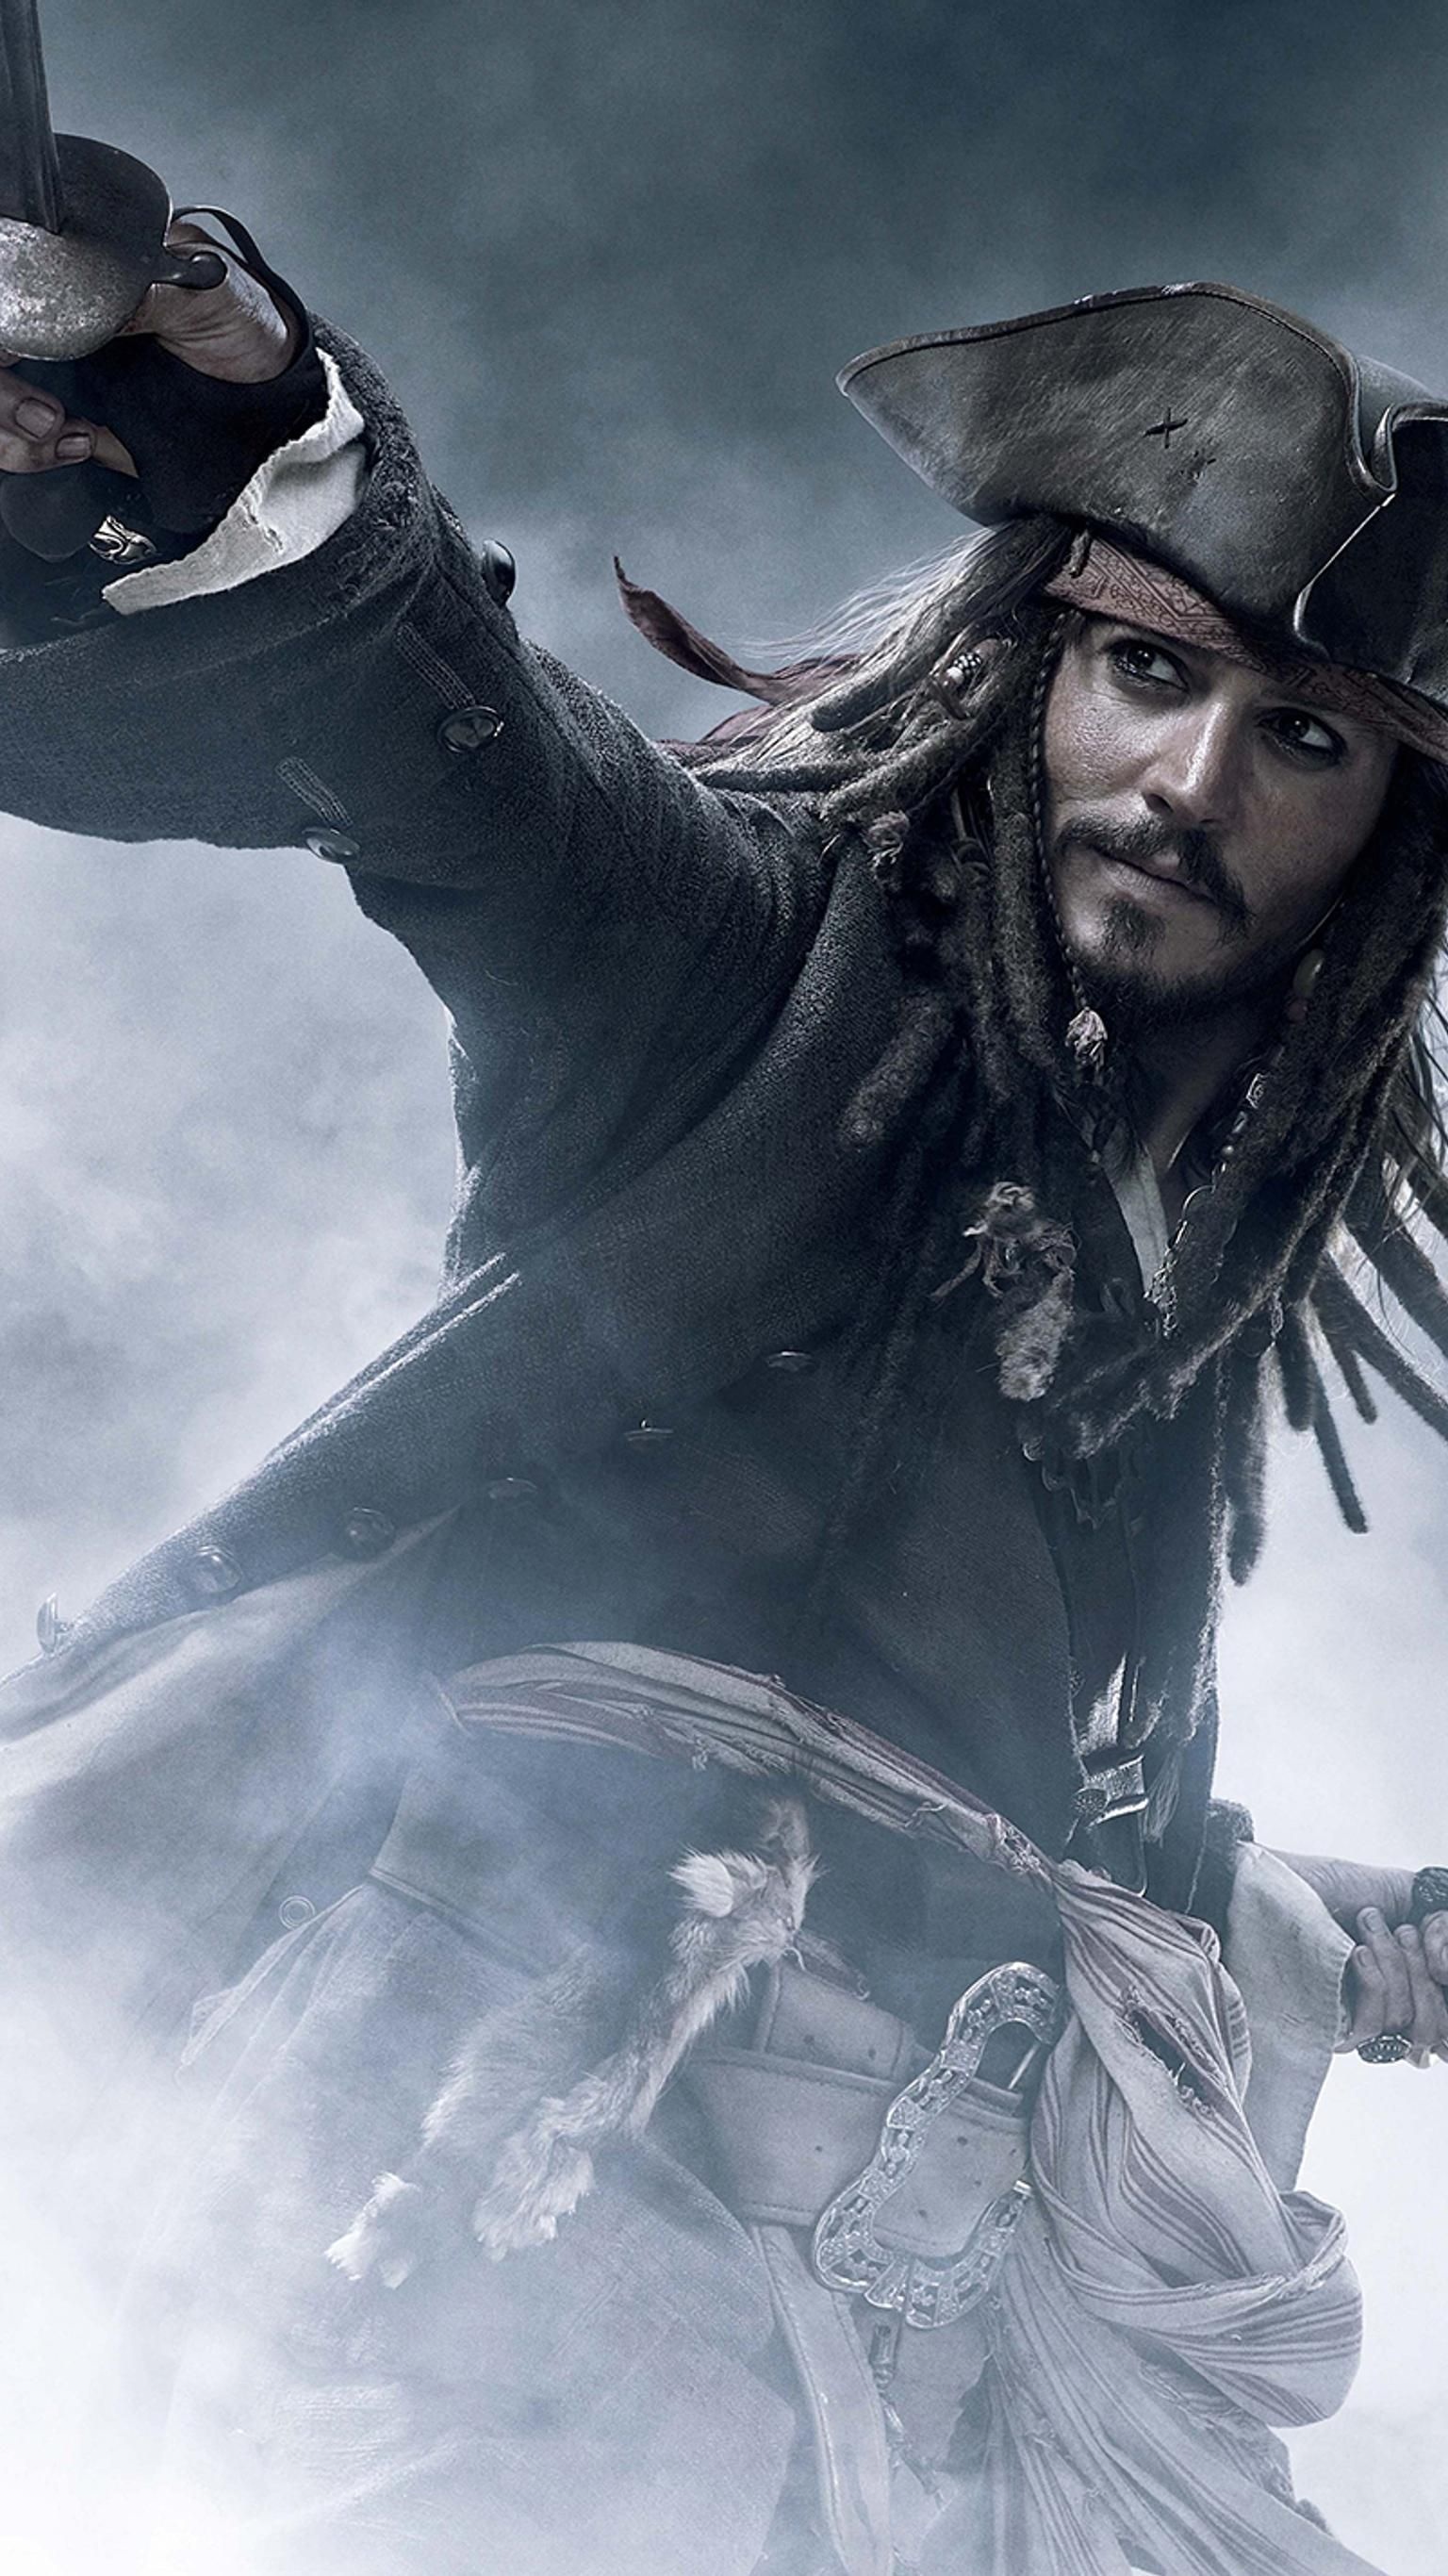 Jack Sparrow phone wallpapers, Top free, Jack Sparrow, Phone backgrounds, 1540x2740 HD Handy